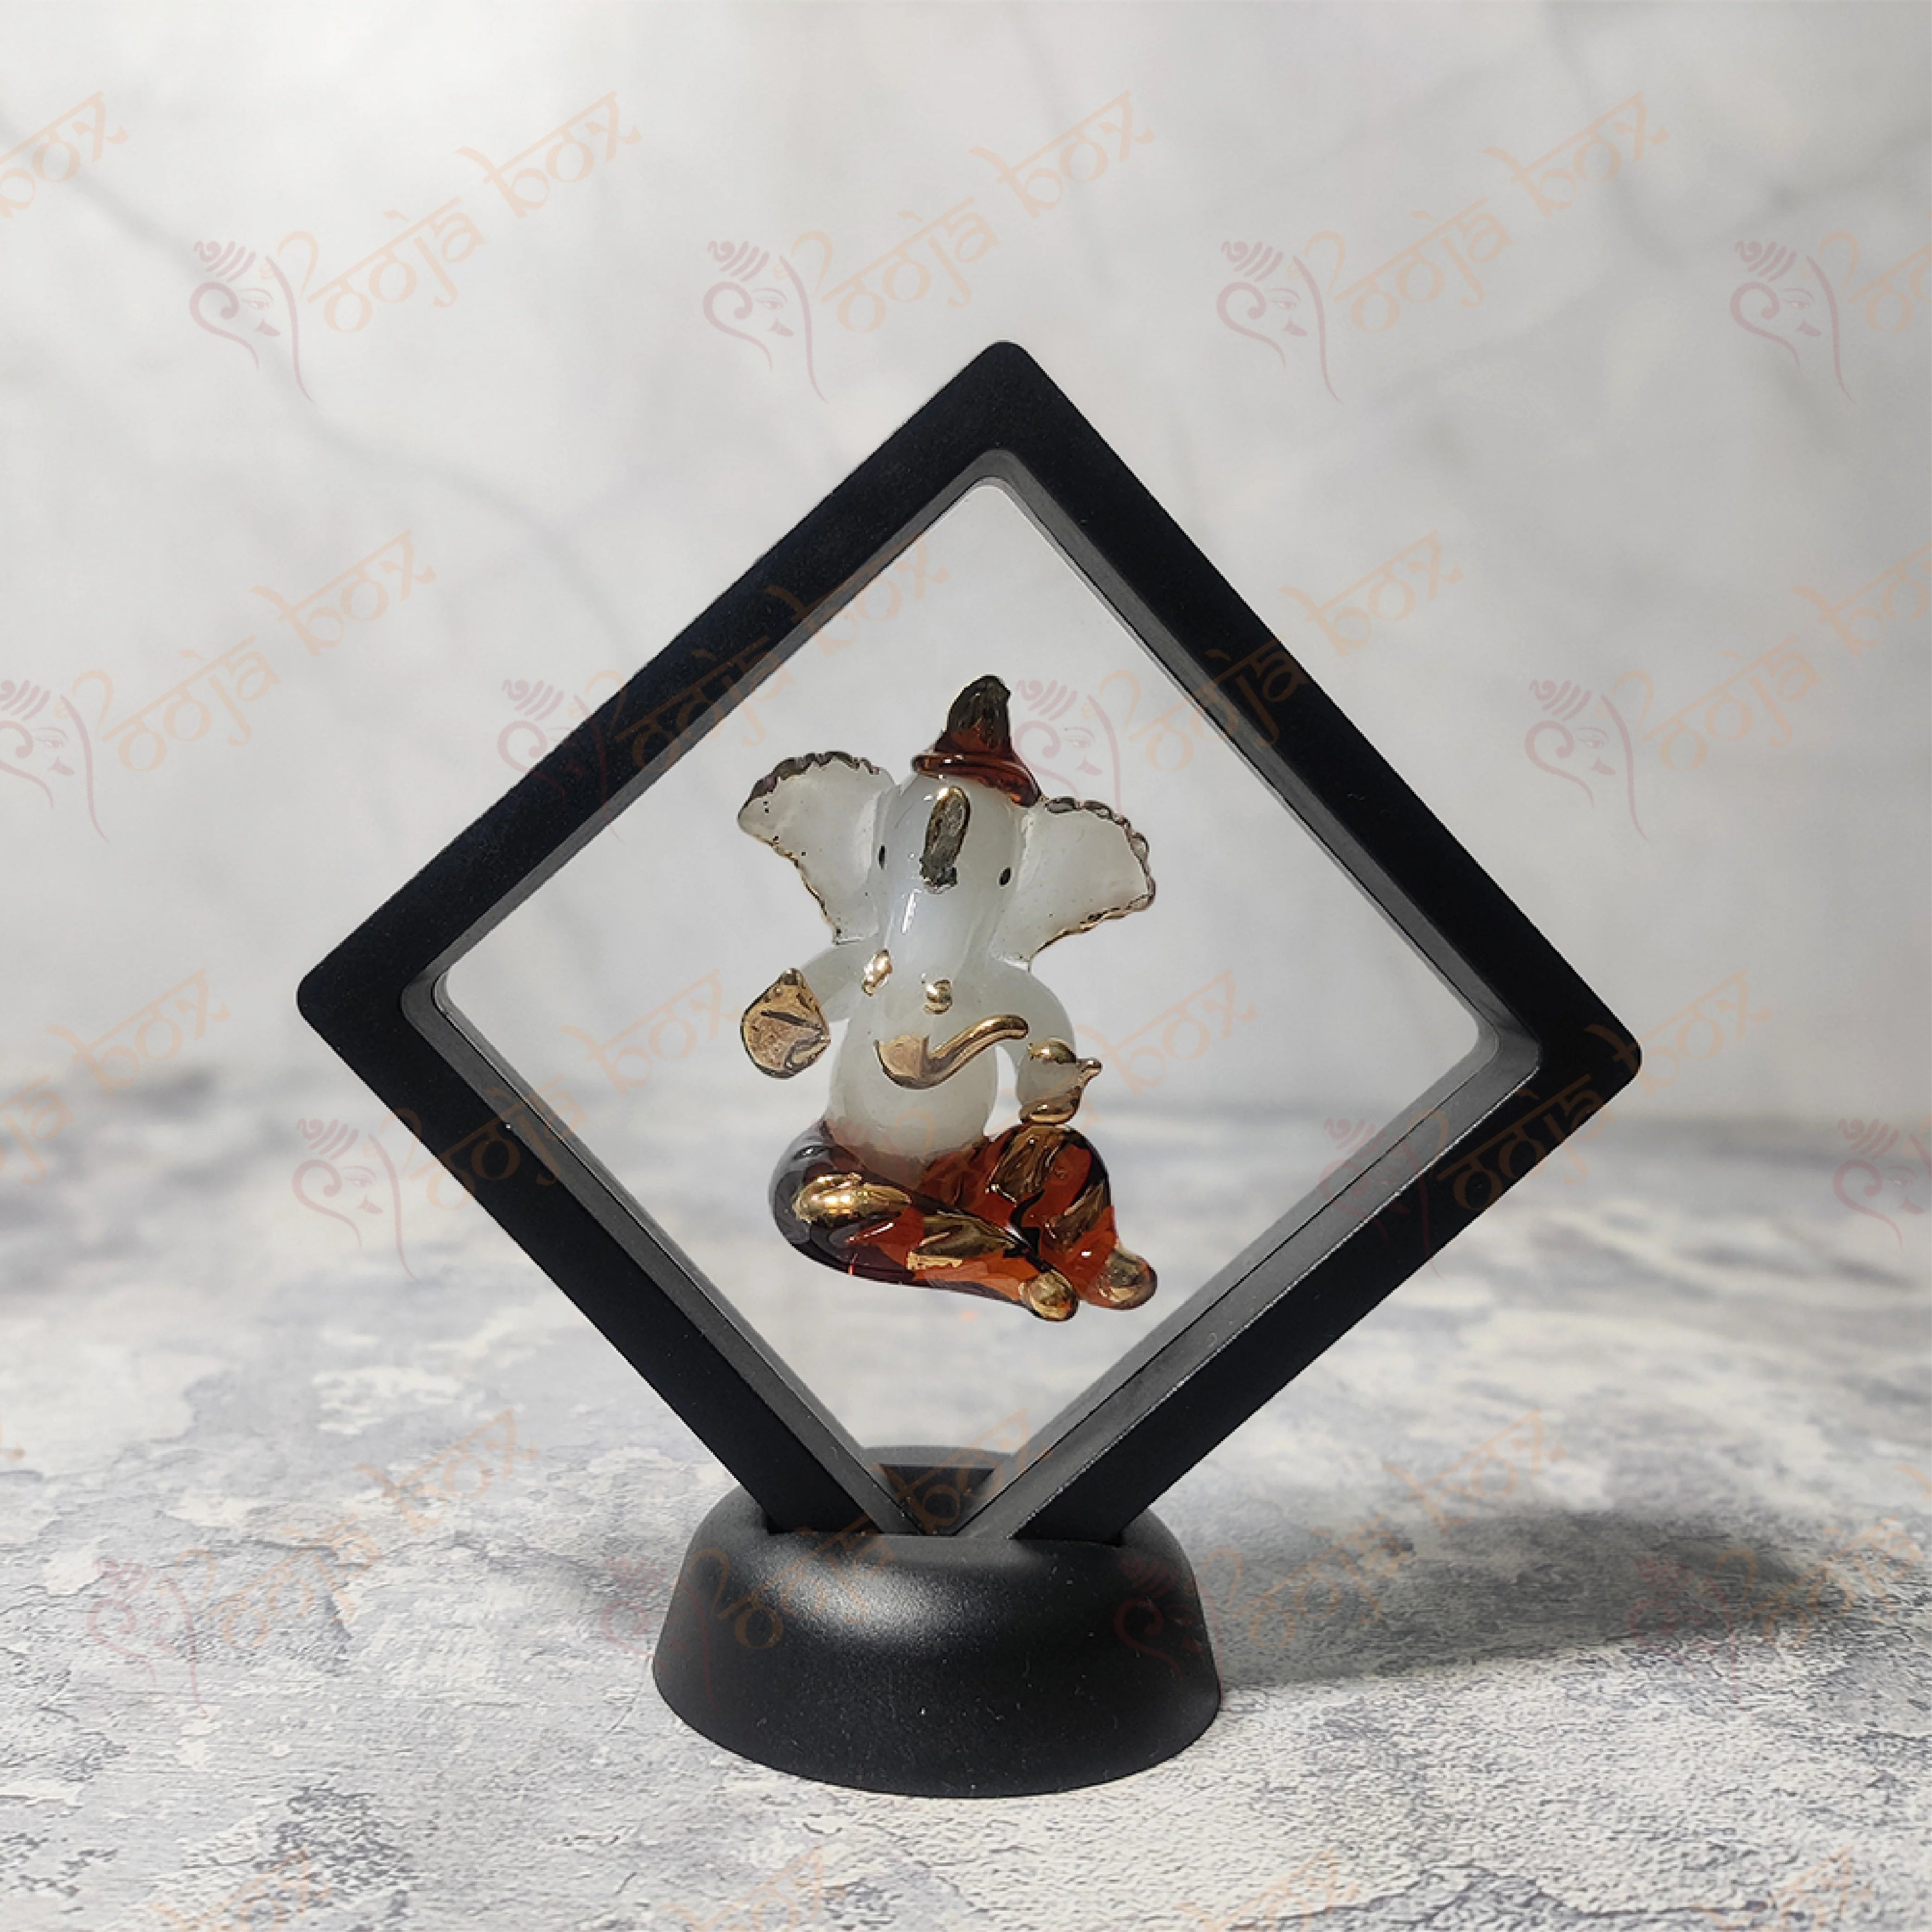 Ganesha Idol for Gift and Home Decoration Ganesha Decorative Showpiece in Black and Maroon Color